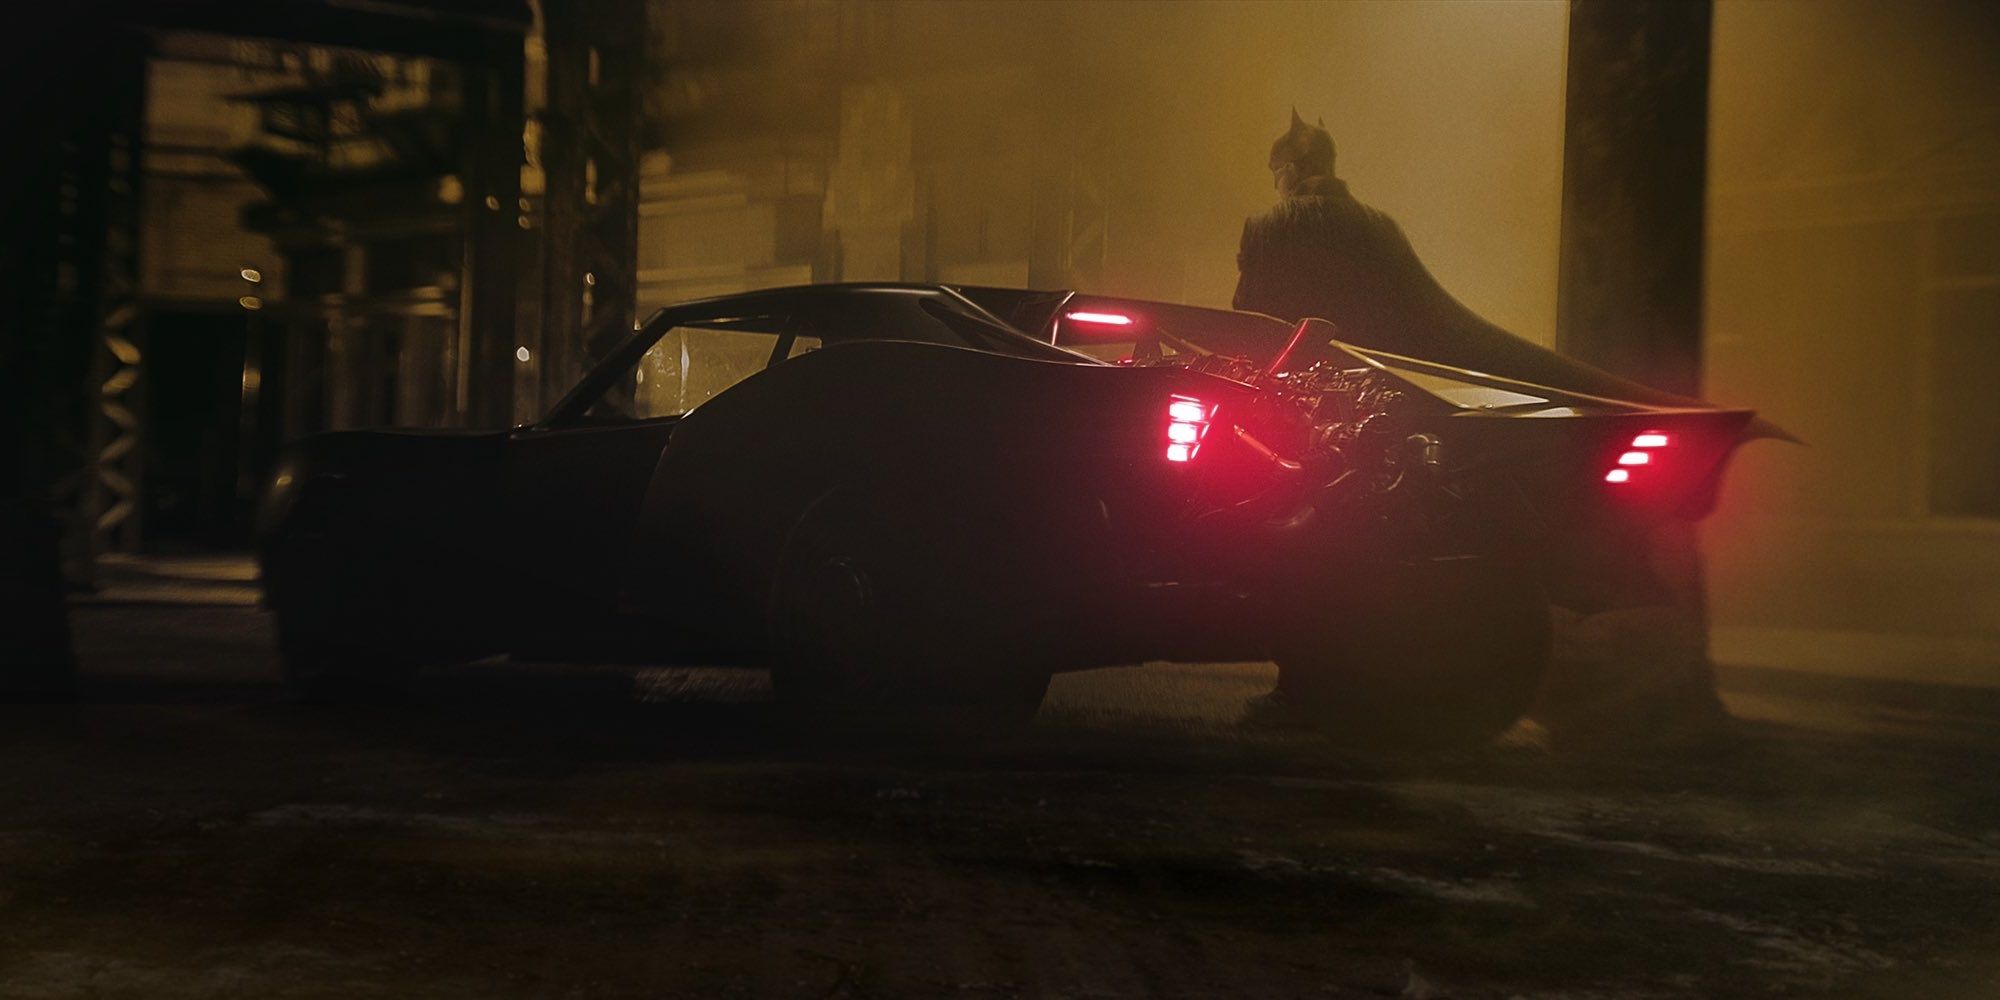 Robert Pattinson stands next to the Batmobile in The Batman